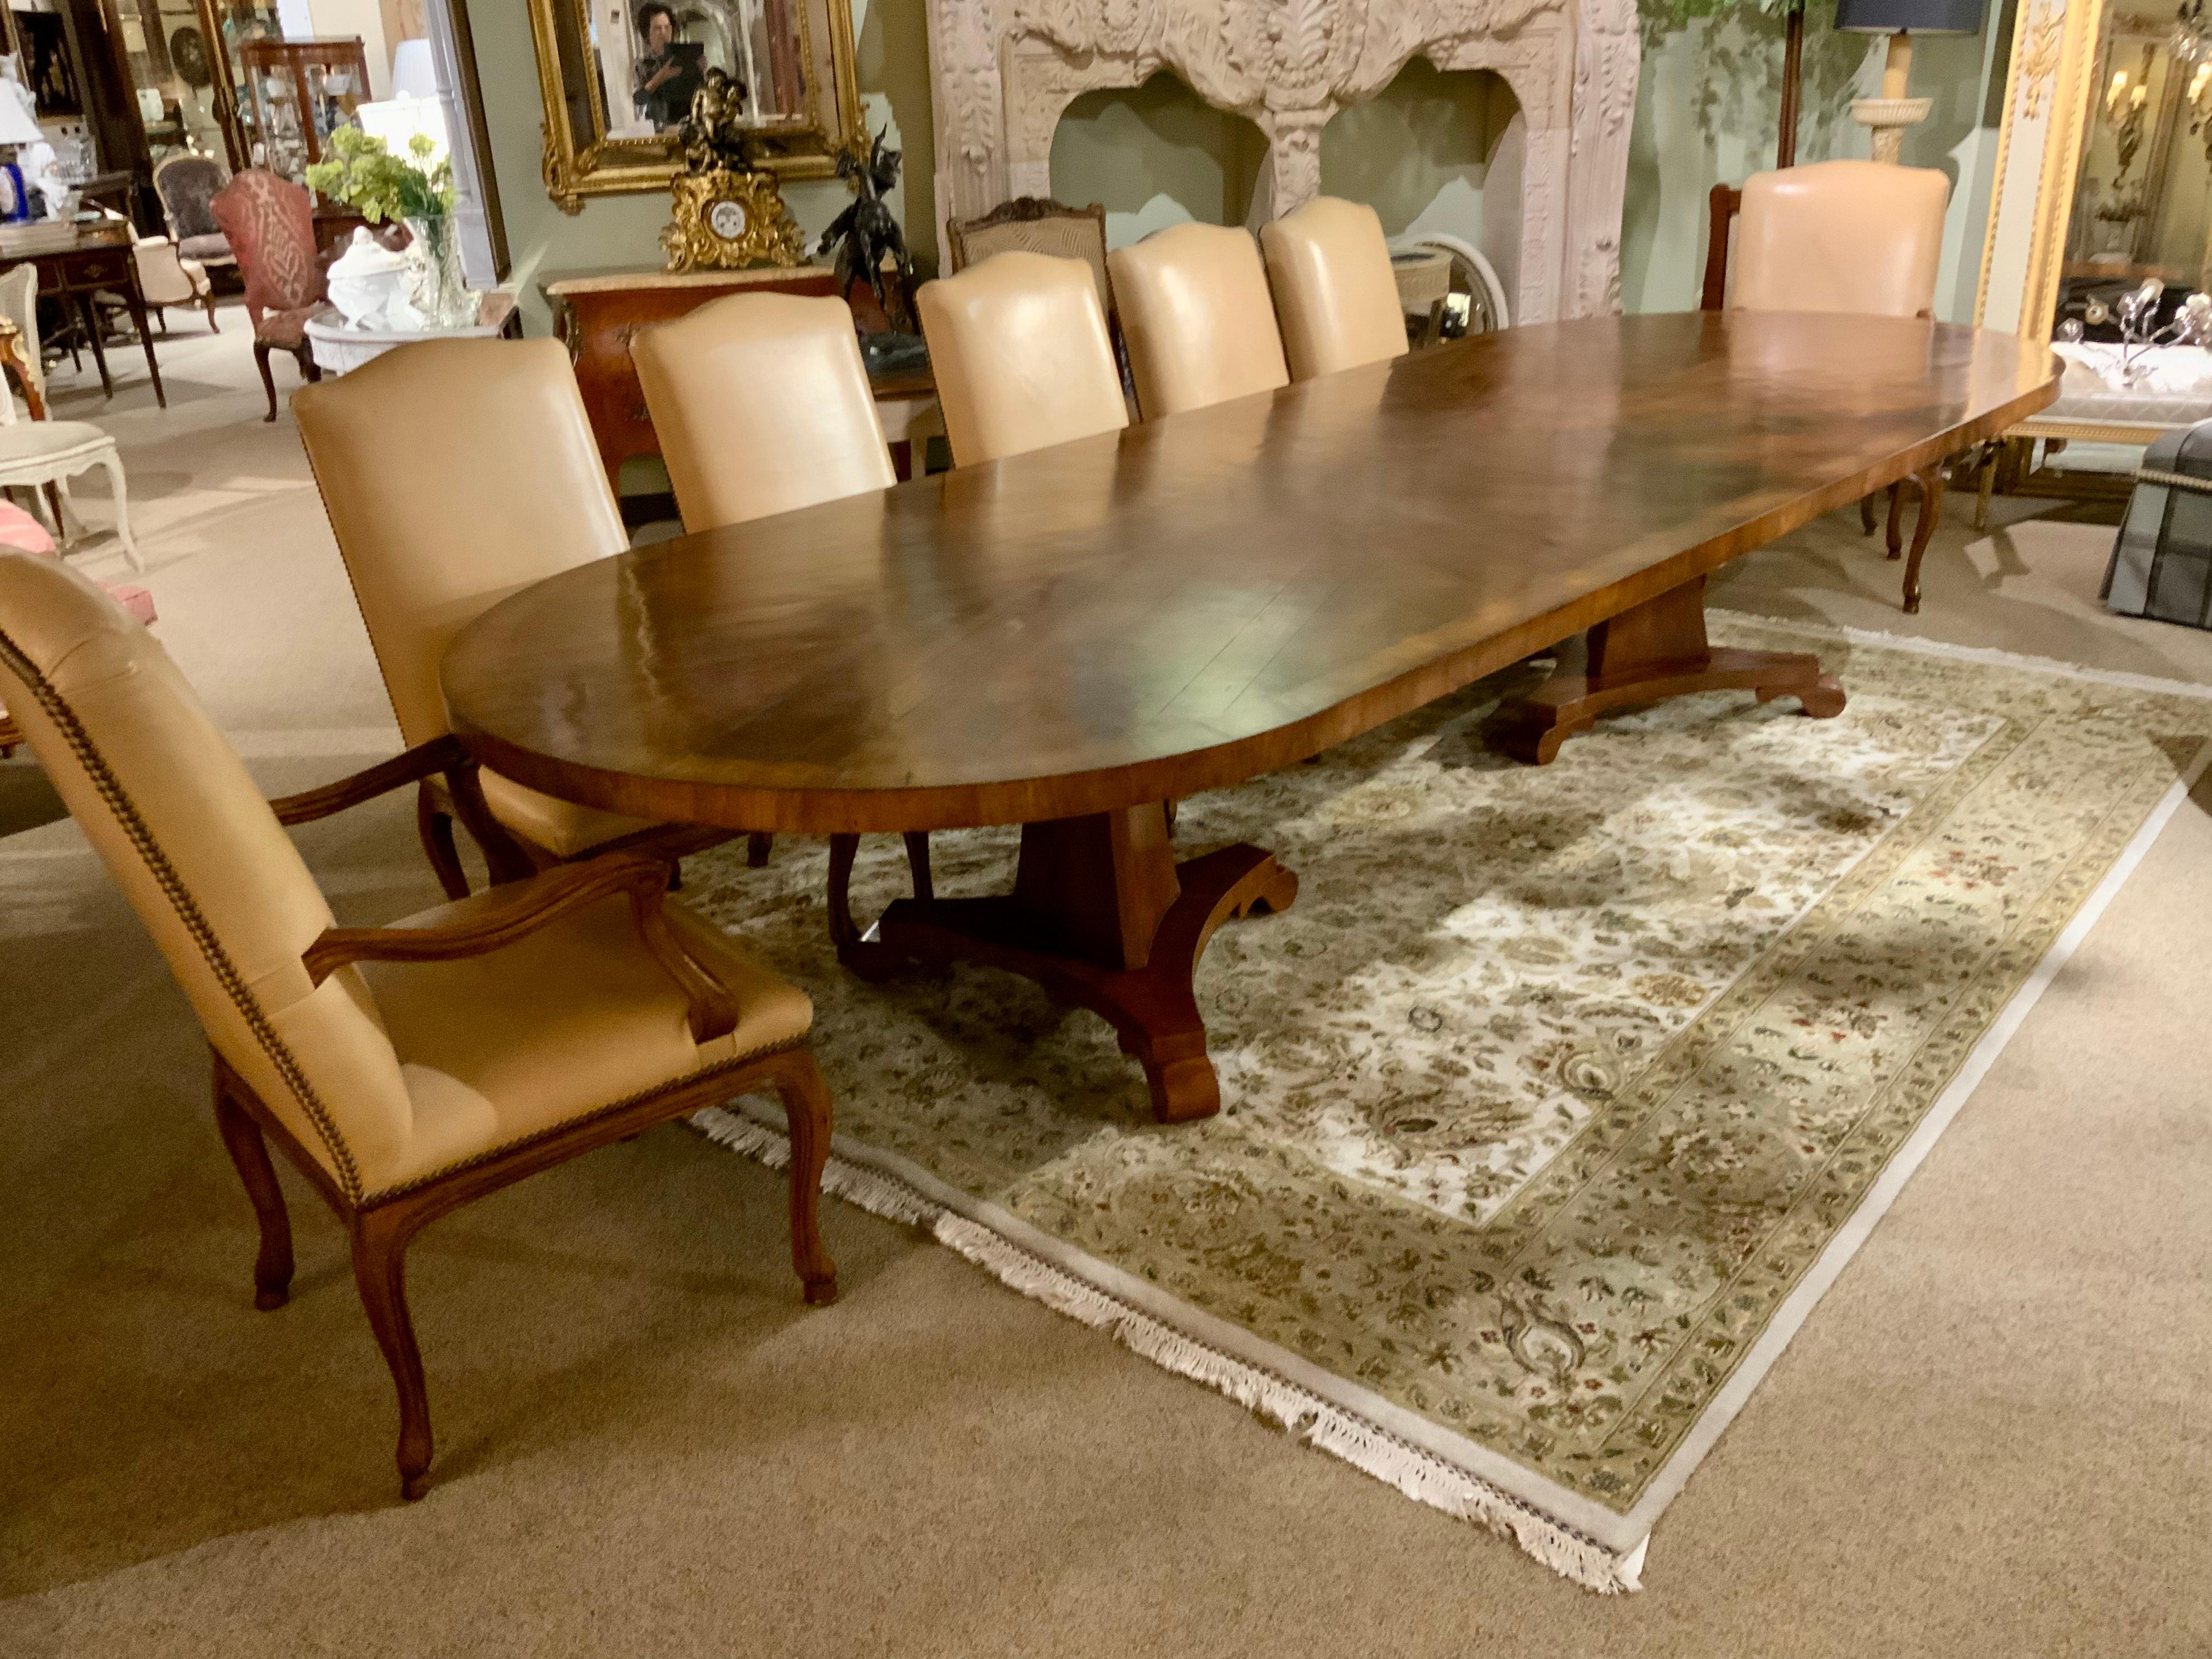 Contemporary Italian Large Oval Dining Table with Two Pedestals 12 Leather High Back Chairs